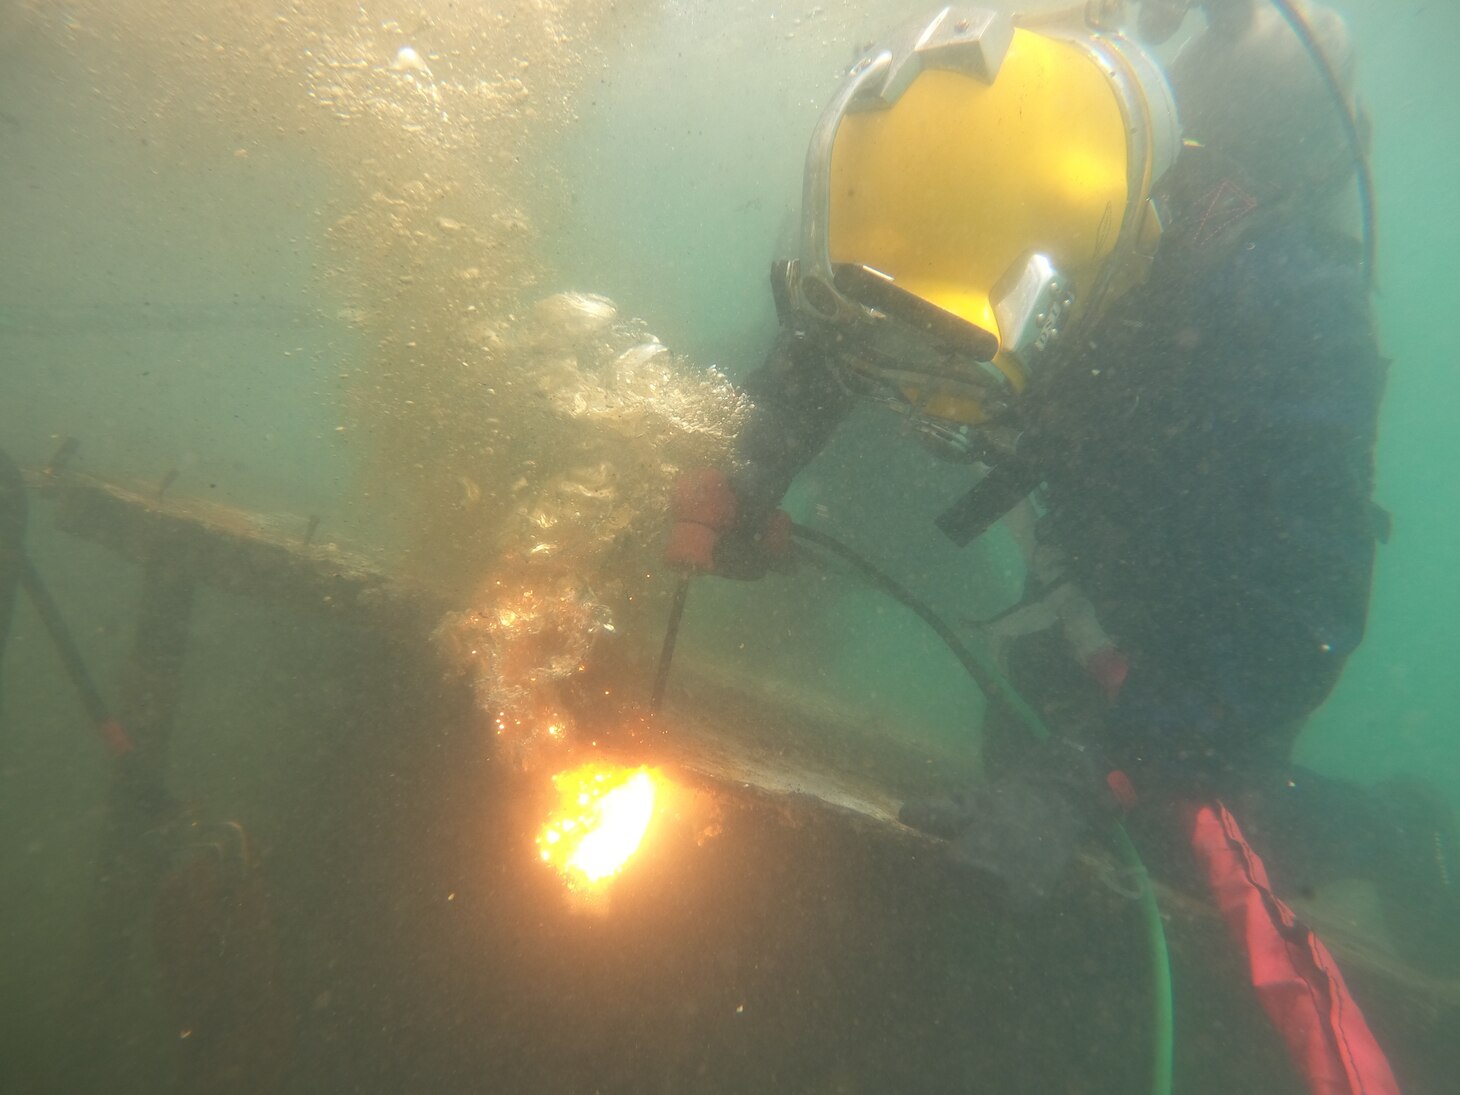 221205-N-NO901-6001 PORT VICTORIA, Seychelles (Dec. 5, 2022) A diver from Underwater Construction Team One cuts apart a shipwreck during a salvage mission in Port Victoria, Seychelles, Dec. 5, 2022. CTF 68, headquartered in Rota, Spain, commands all Navy Expeditionary Forces in U.S. European Command and U.S. Africa Command areas of responsibility and is responsible for providing EOD operations, naval construction, expeditionary security, and theater security efforts in direct support of U.S. Naval Forces Europe-Africa and U.S. Sixth Fleet. (U.S. Navy courtesy photo)